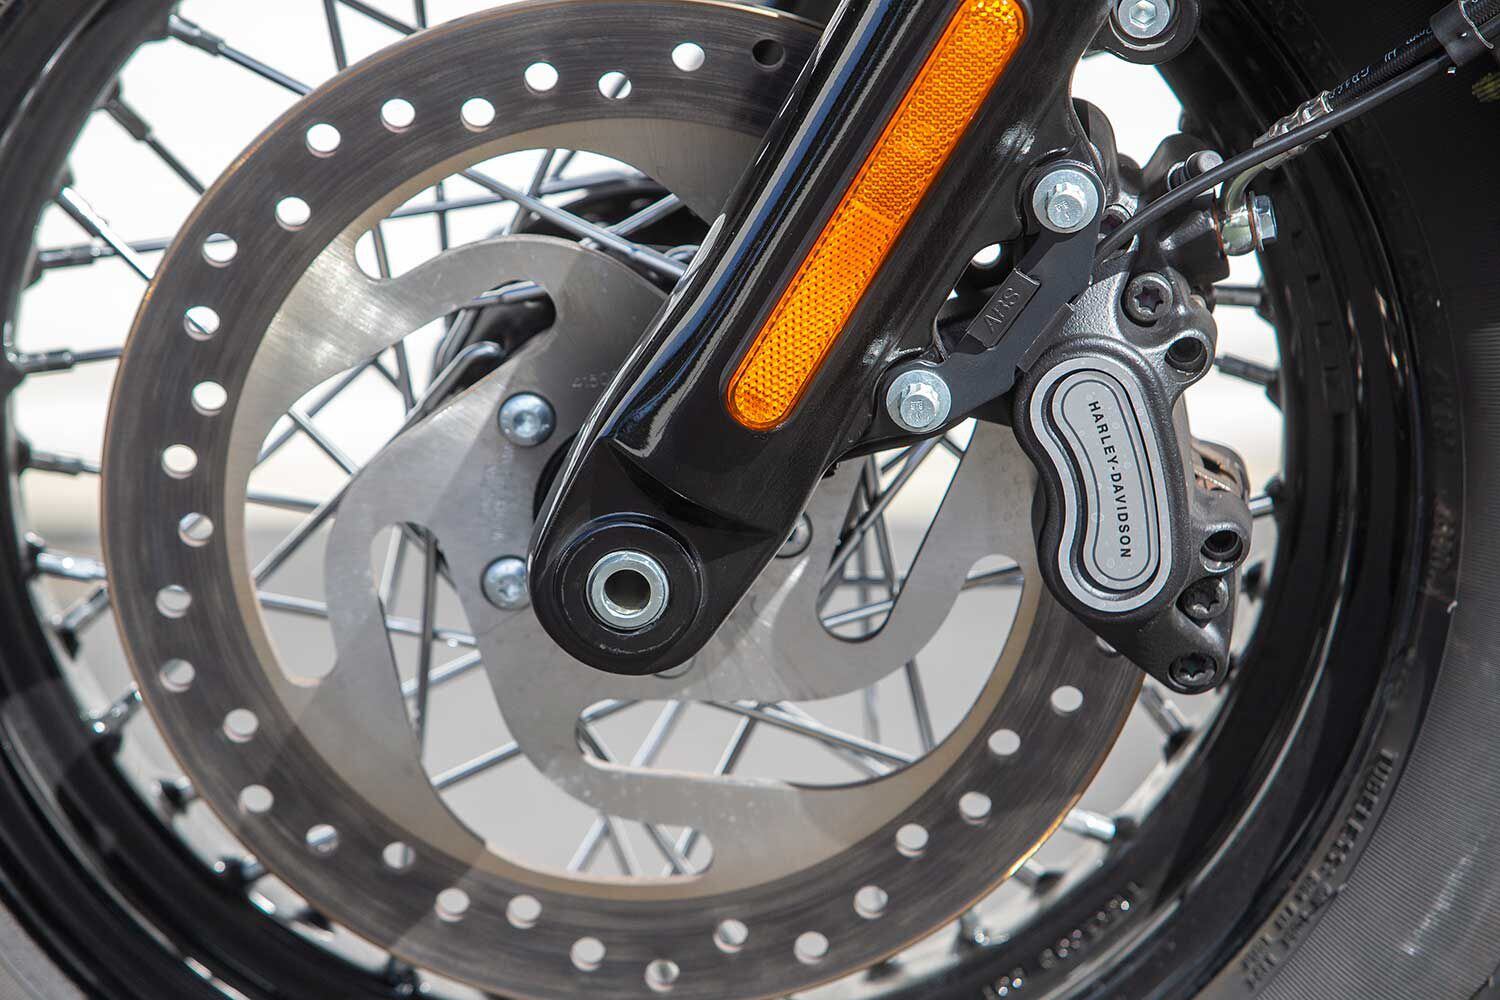 A single four-piston caliper clamping to a large 300mm disc up front helps stop the Softail Slim relatively quickly, but struggles to present feel at the lever.